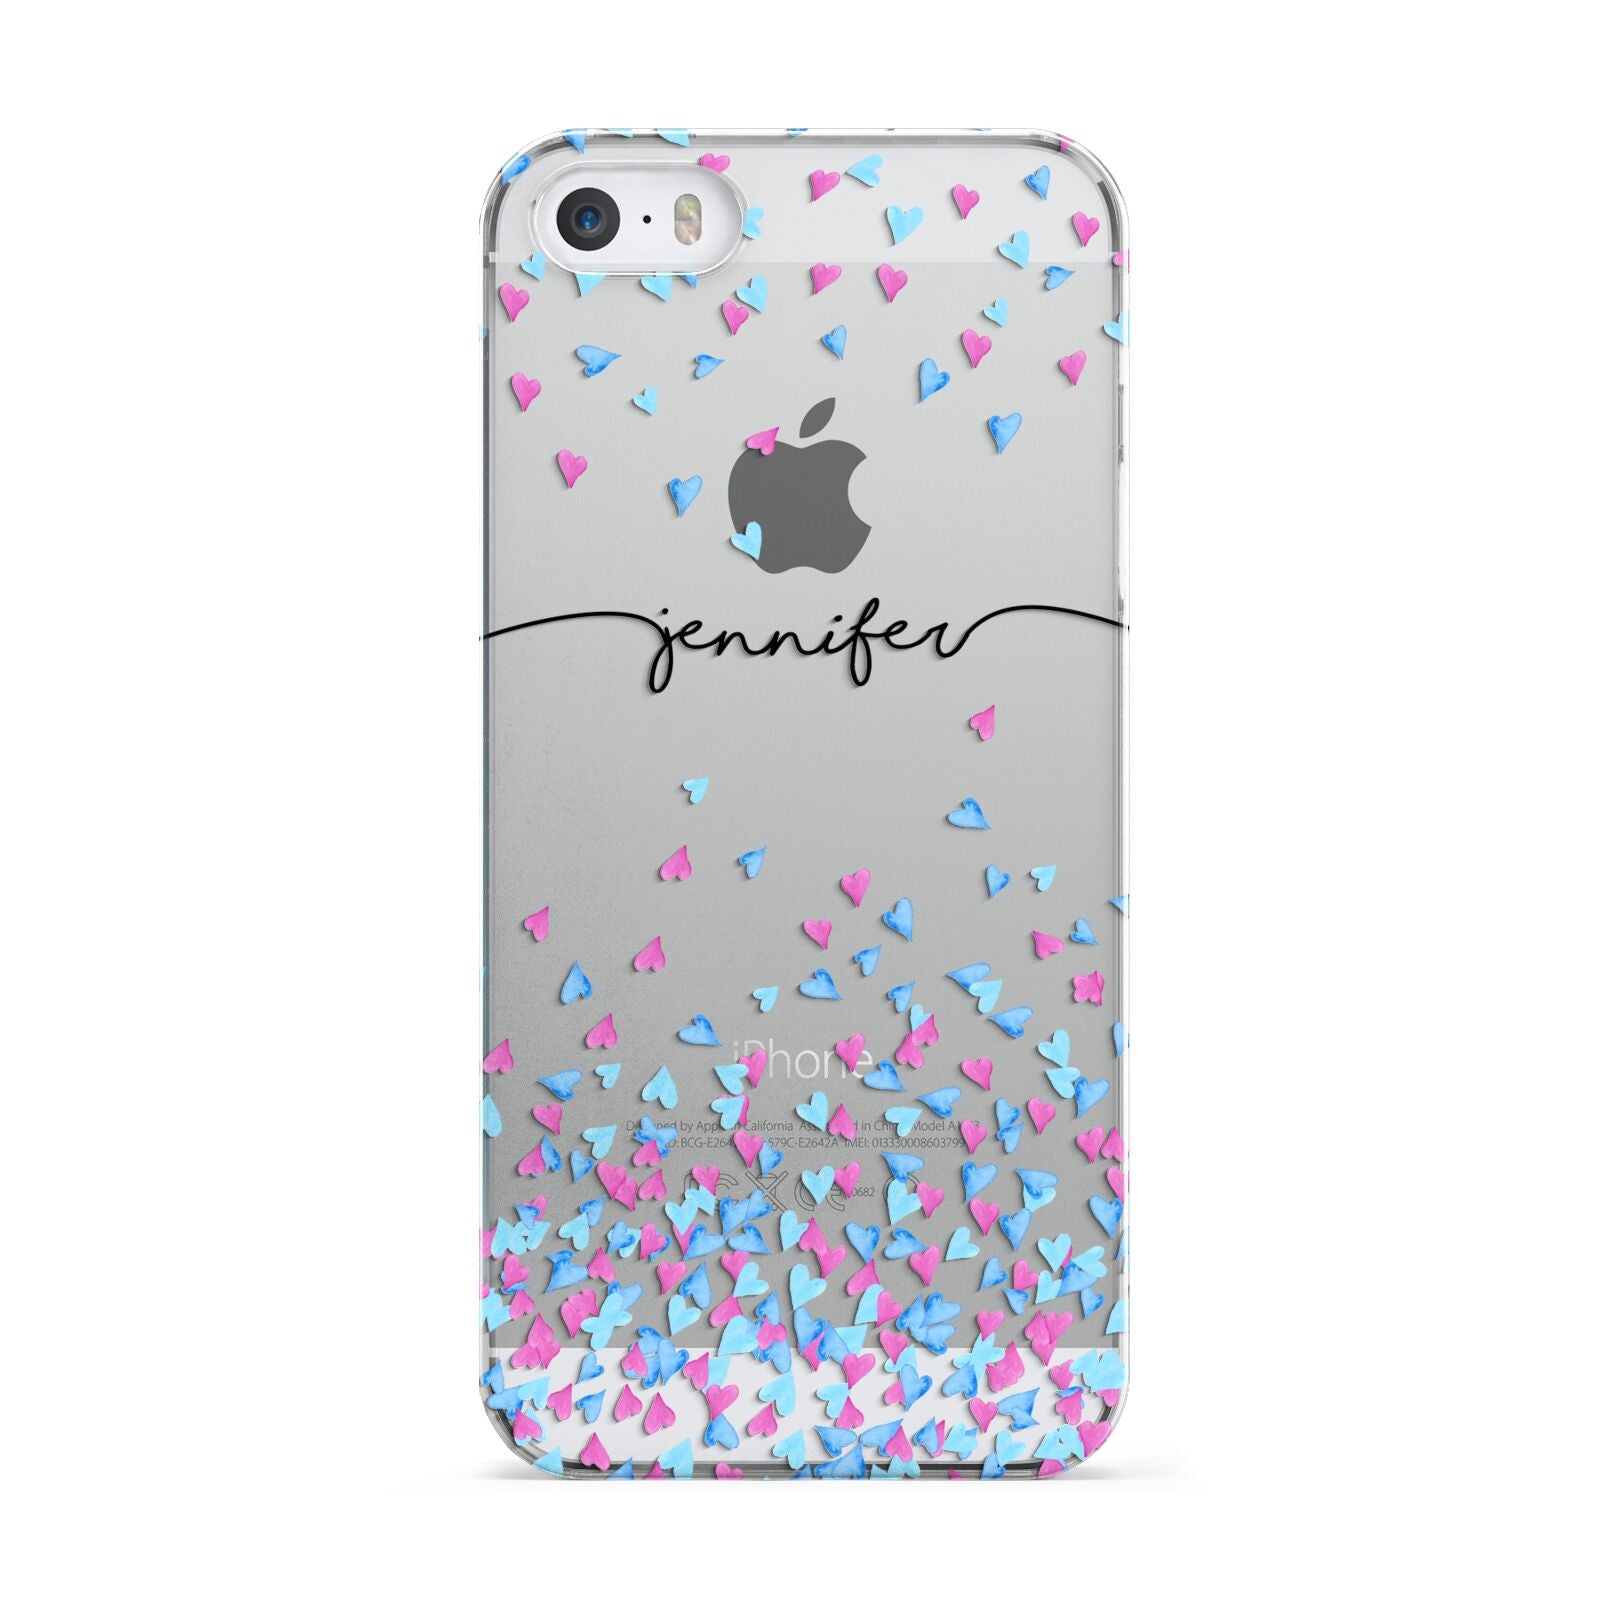 Personalised Confetti Hearts Apple iPhone 5 Case